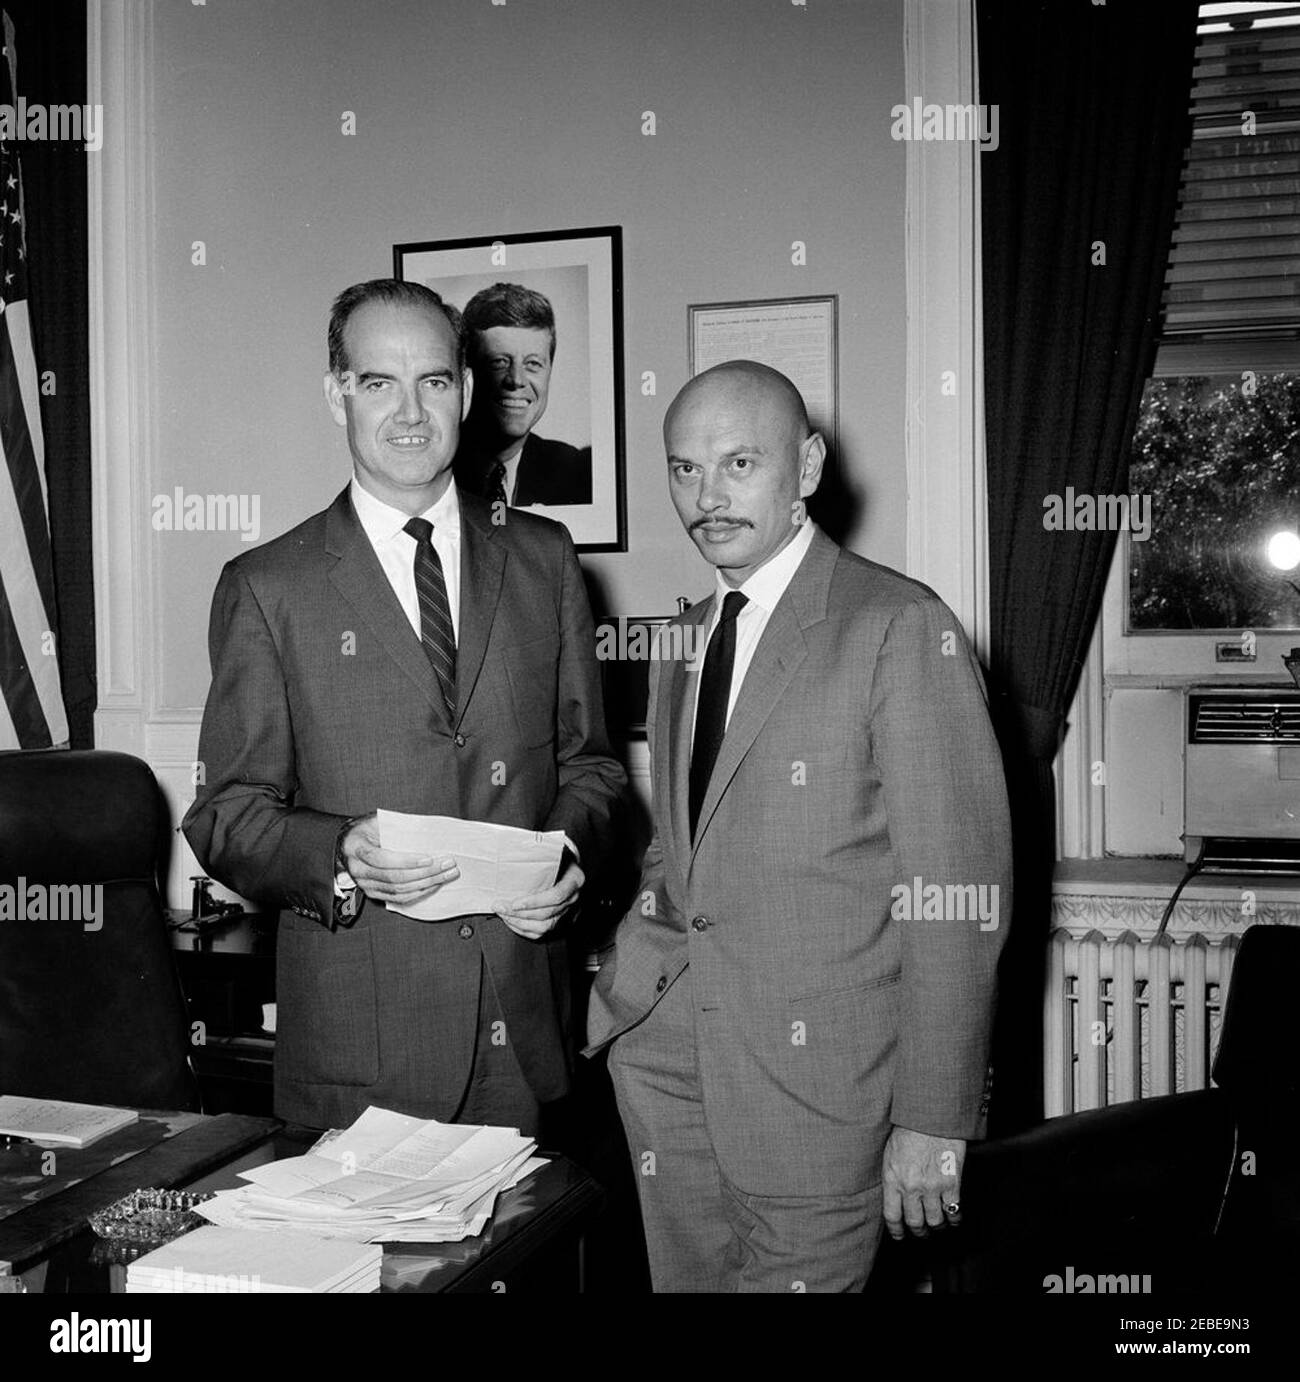 Director of Food for Peace George S. McGovern with Yul Brynner. Director of Food for Peace George McGovern meets with actor Yul Brynner, a member of the American Food for Peace Council, in the Food for Peace Offices, Executive Office Building, Washington, D.C. Stock Photo